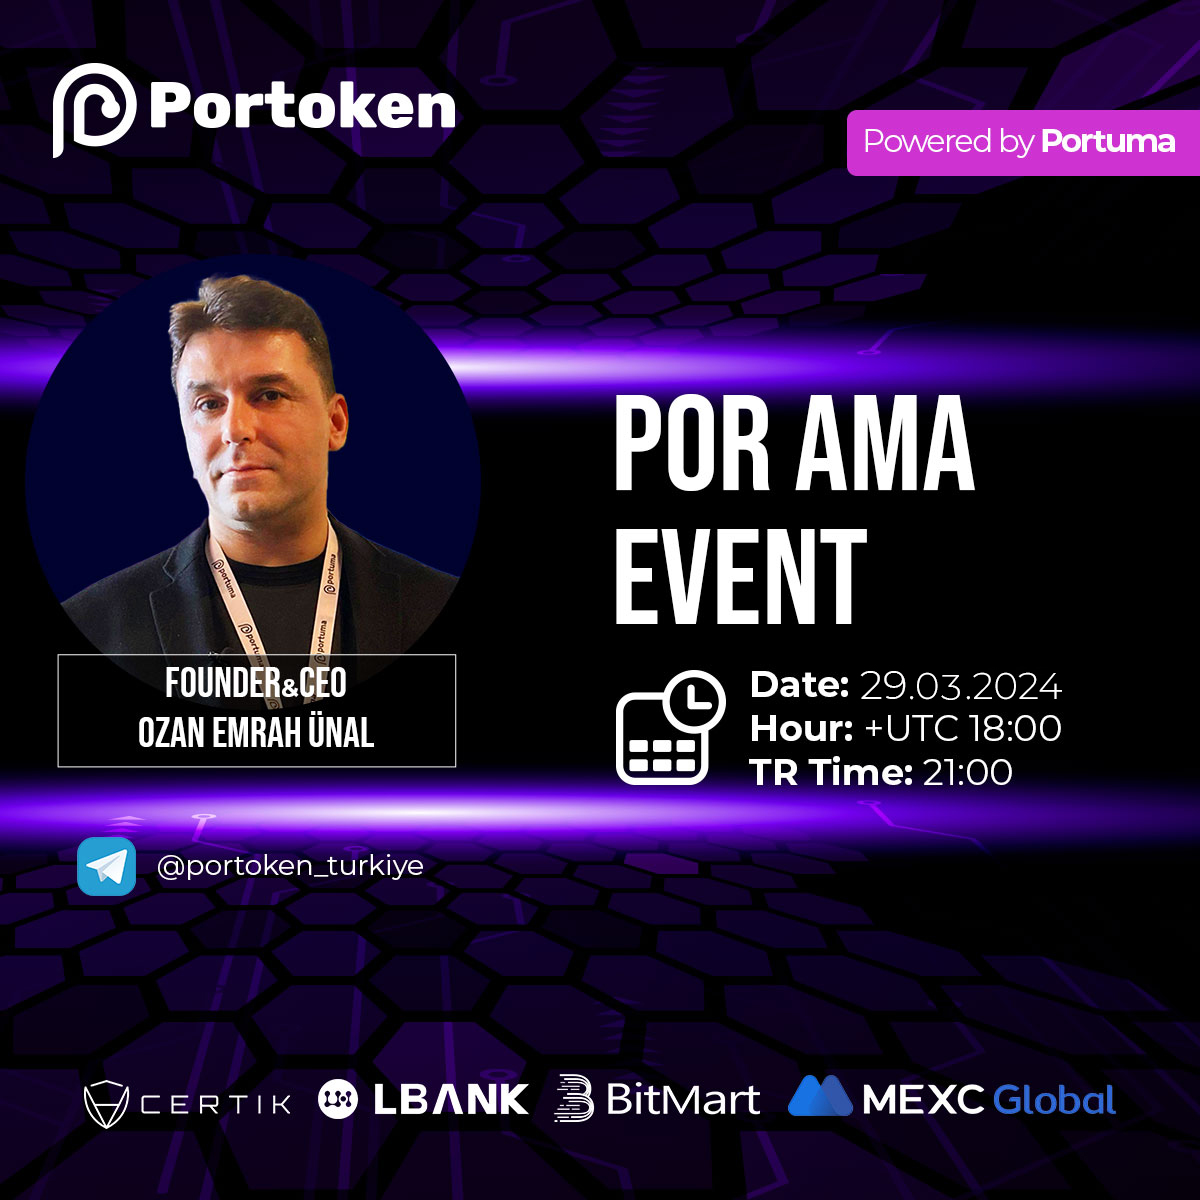 Don't miss the POR AMA EVENT guys! We are always here for you 😎